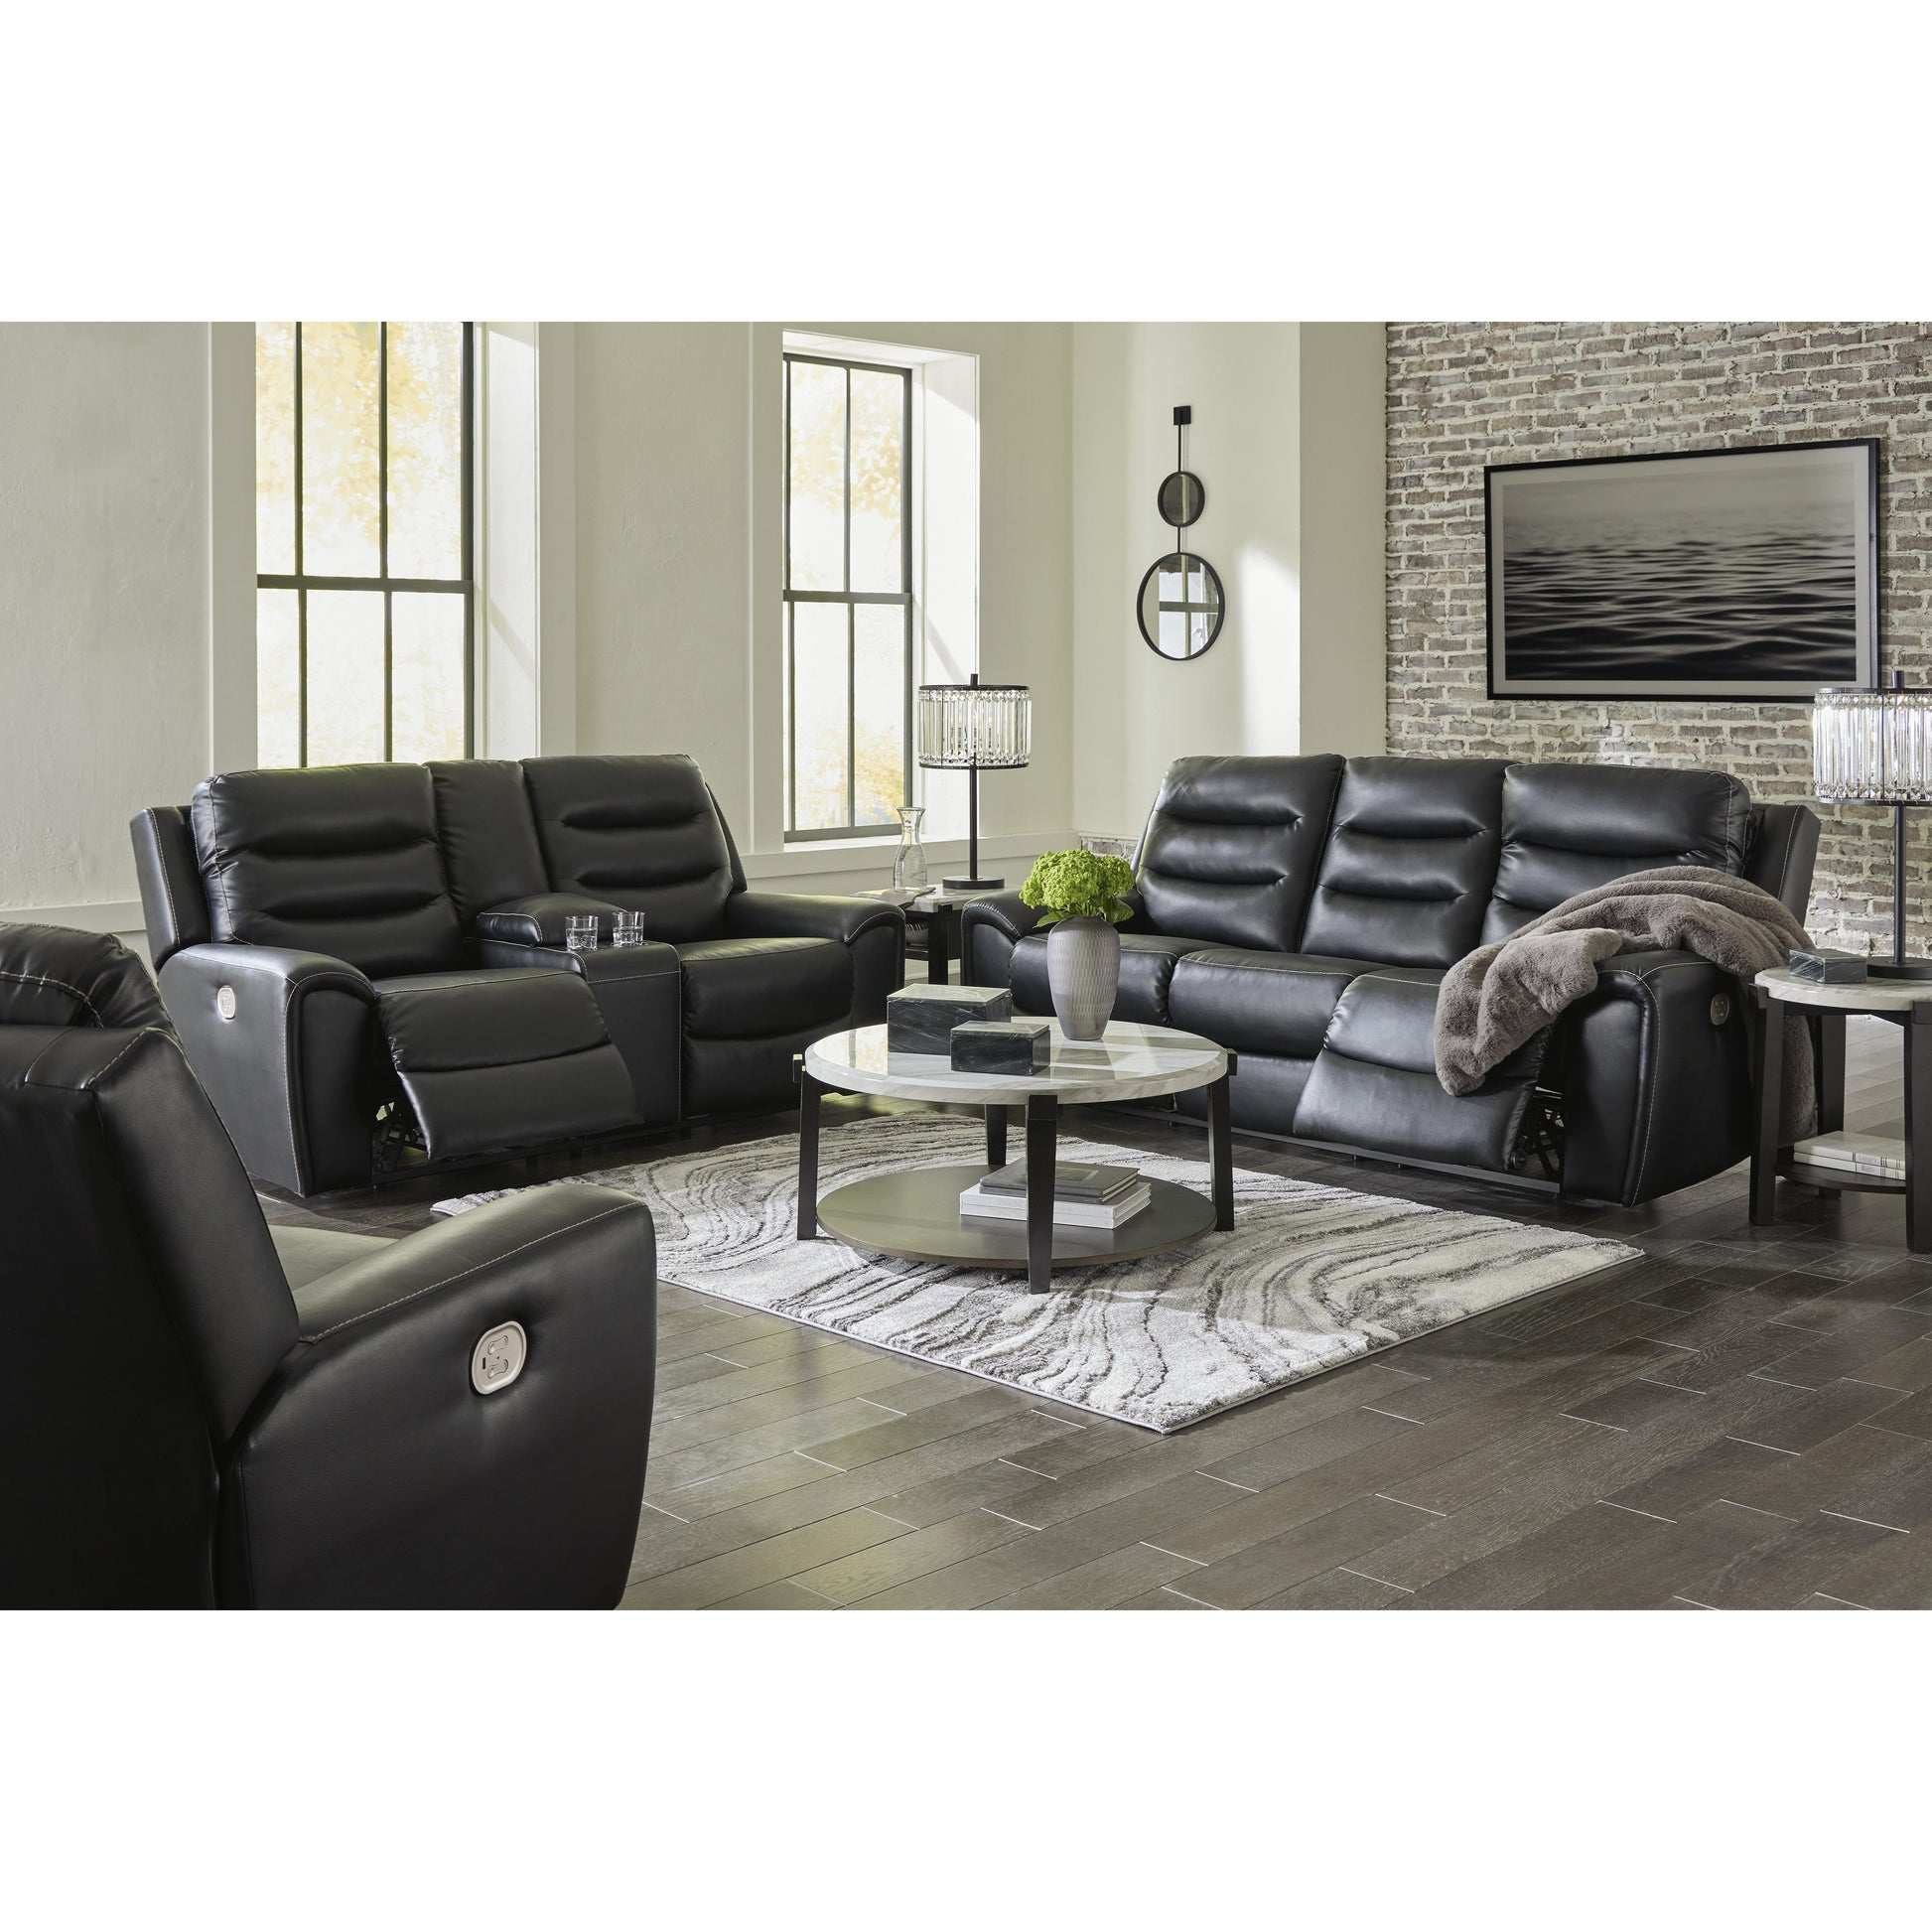 Signature Design by Ashley Warlin Power Reclining Leather Look Loveseat 6110518 IMAGE 15